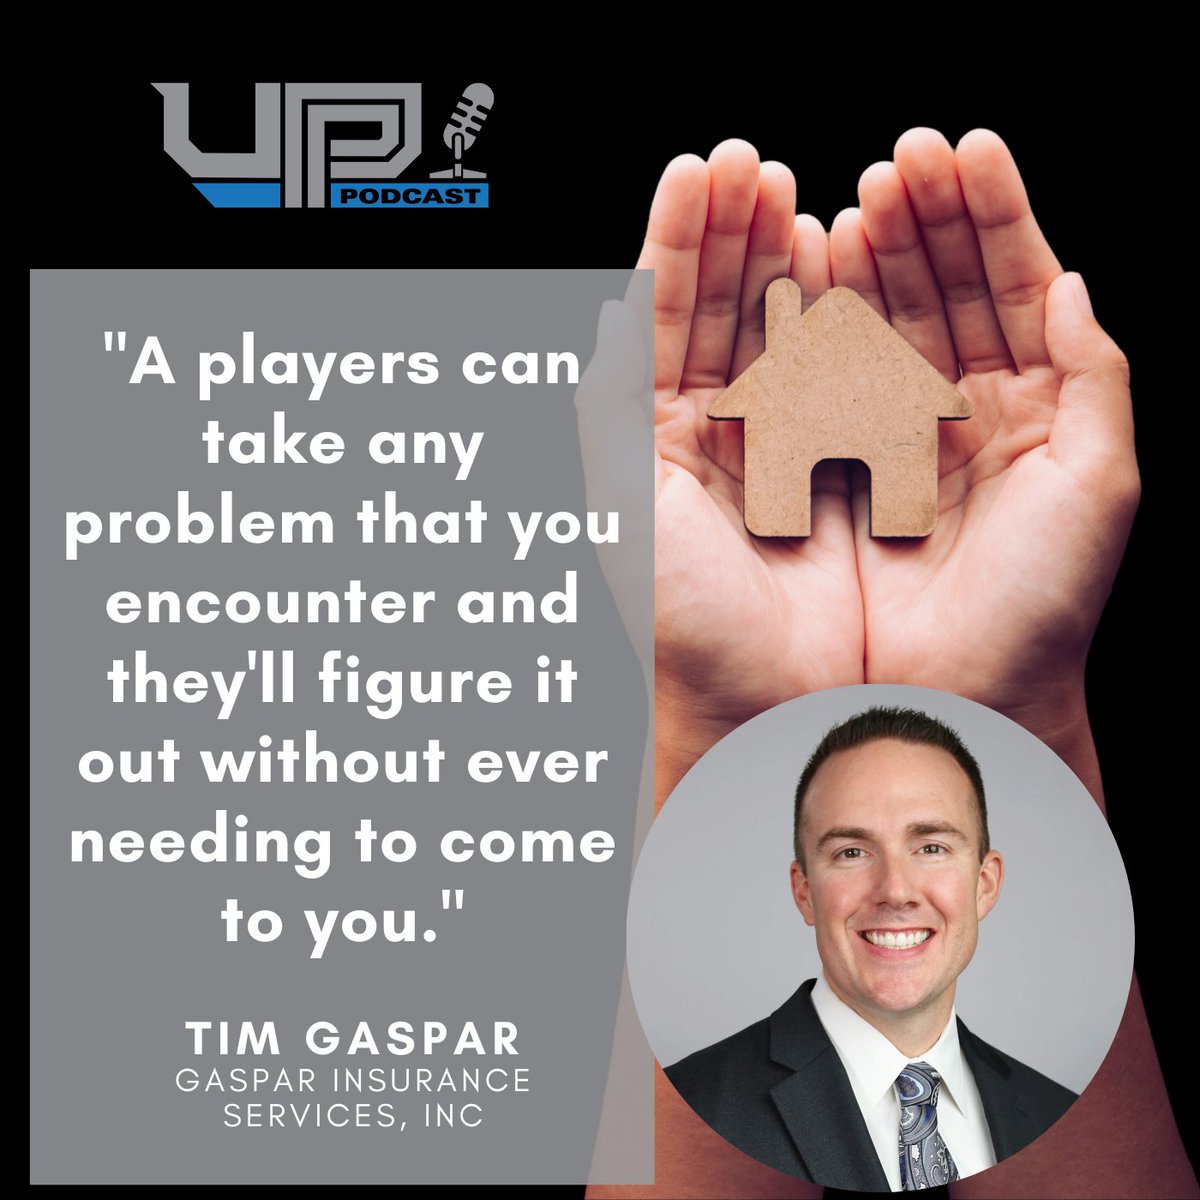 Do you seek out A-Players for your team?

Listen: bit.ly/UPPE210 
Watch: bit.ly/UPPYT210 

#UnstoppableProfitPodcast #UPPLife #Entrepreneur #Leadership #Coaching #Insurance #A-Player #PersonalDevelopment #Authenticity #NicheMarketing